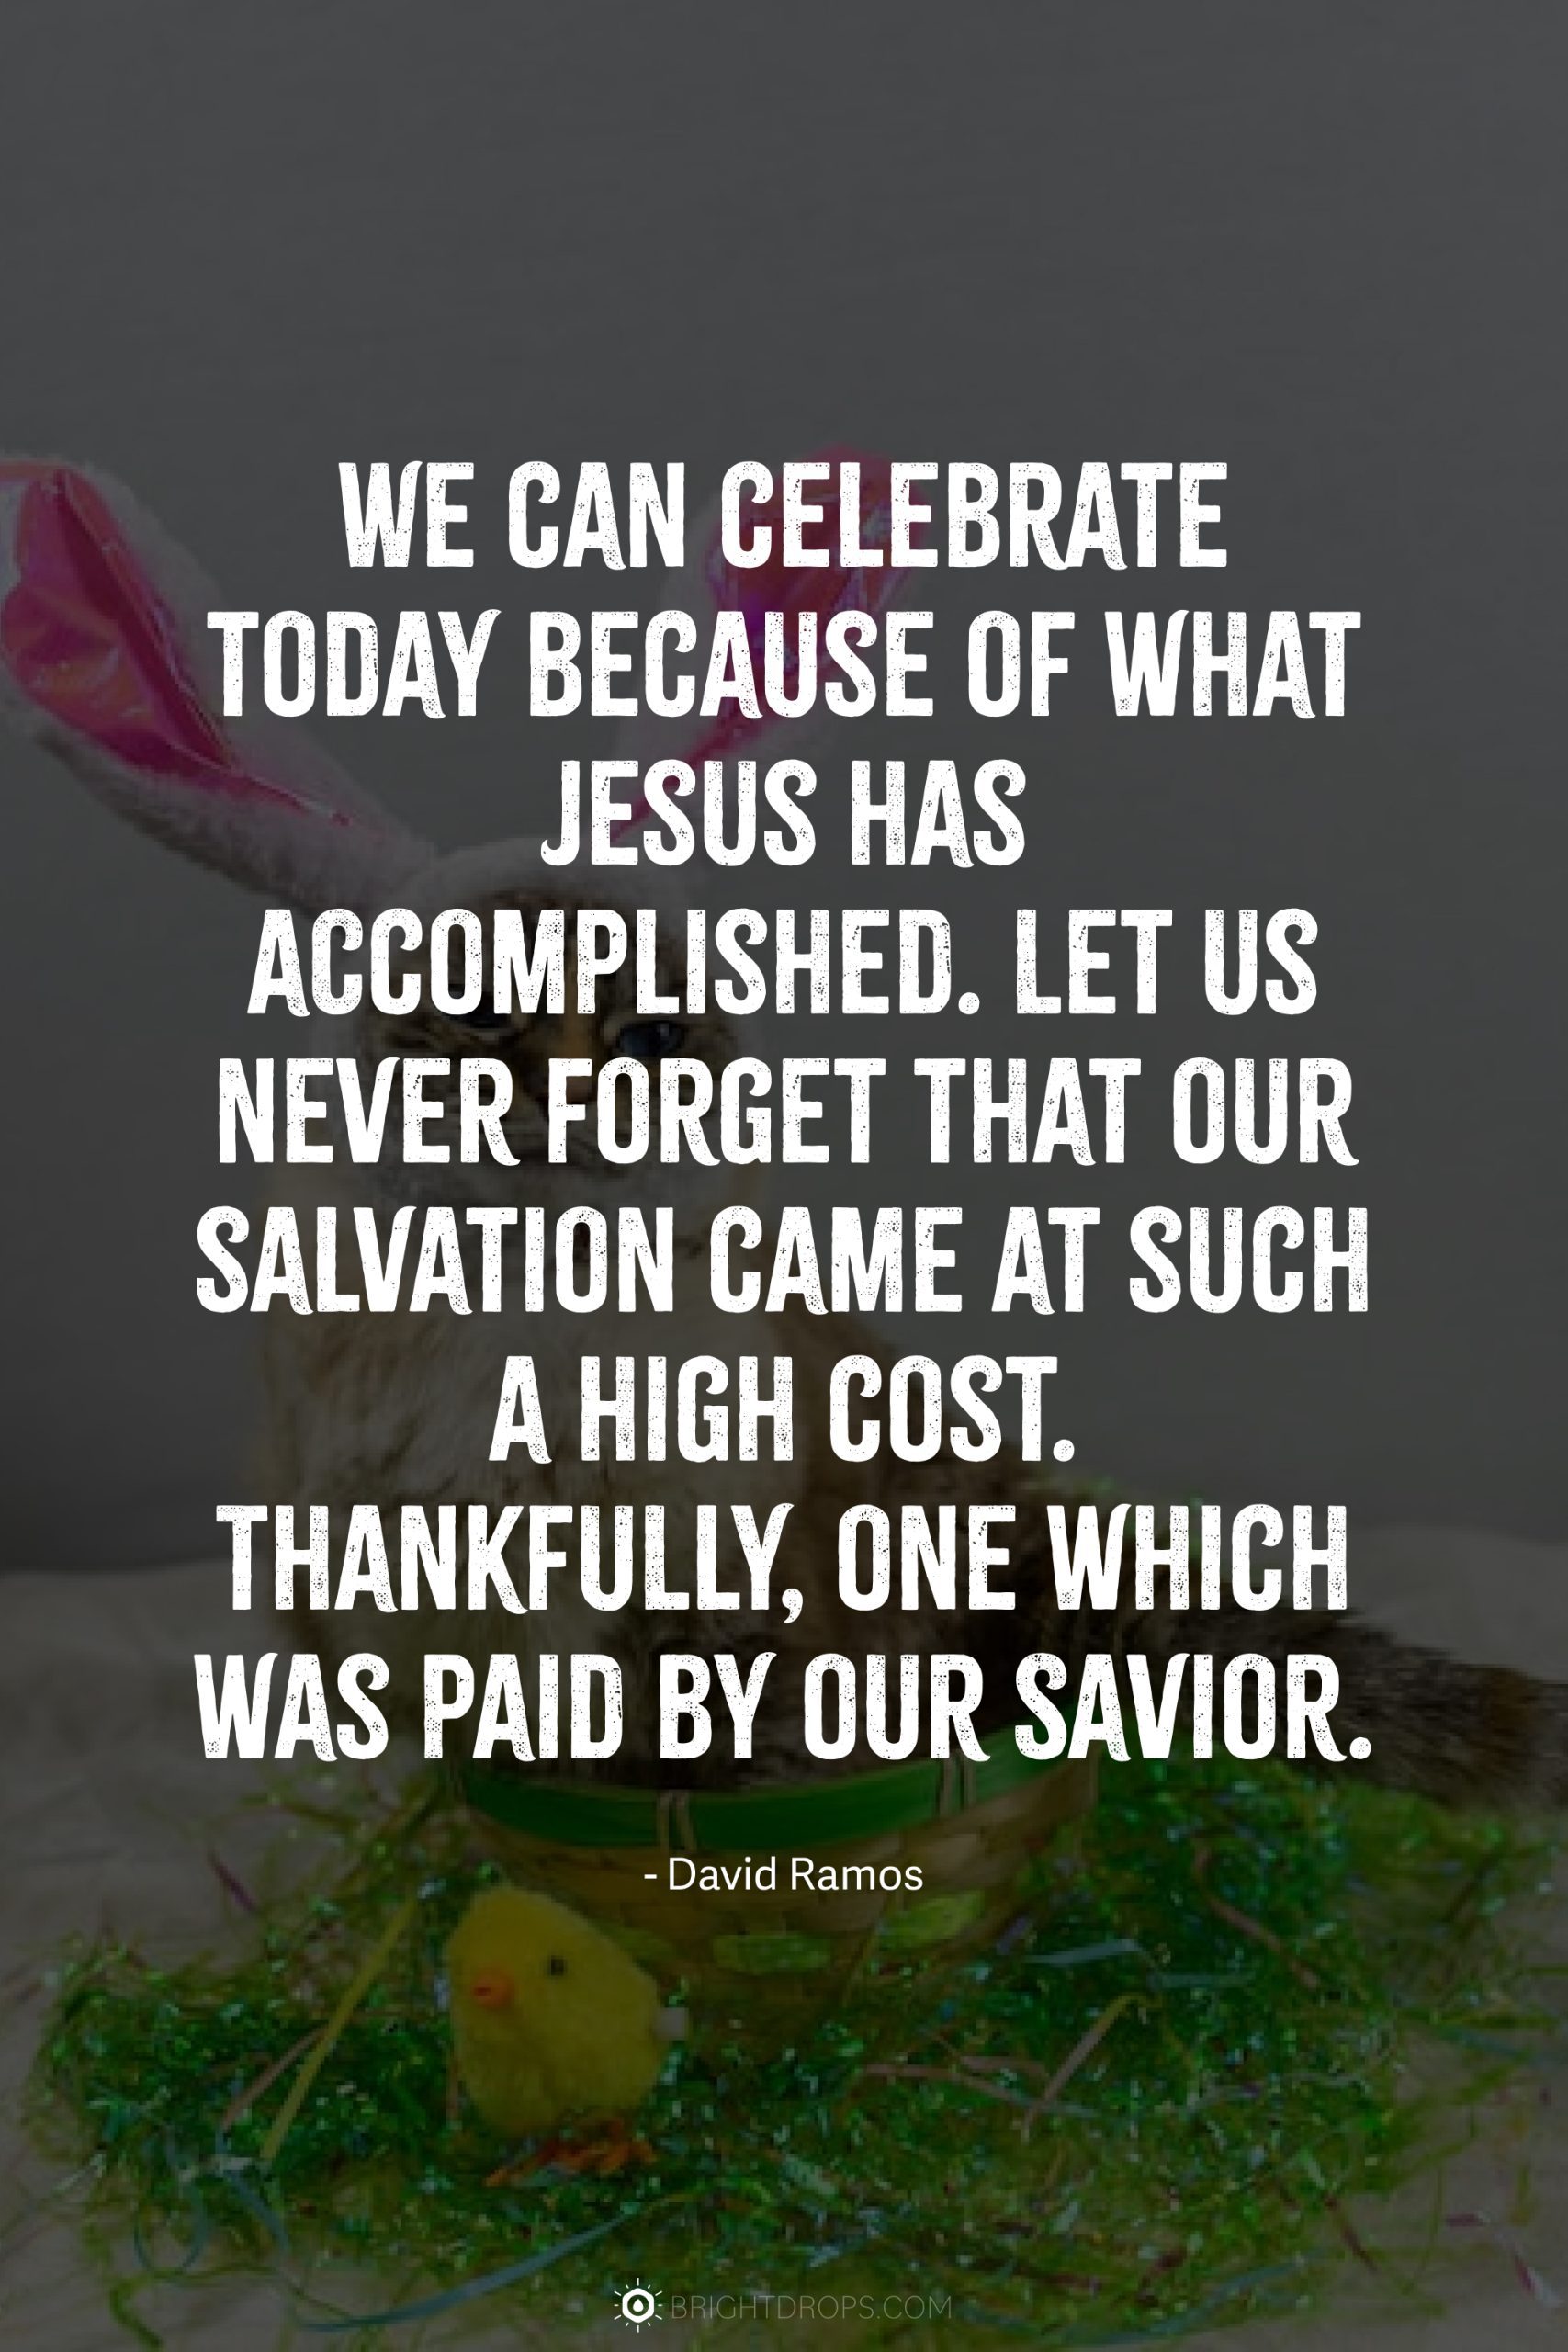 We can celebrate today because of what Jesus has accomplished. Let us never forget that our salvation came at such a high cost. Thankfully, one which was paid by our Savior.